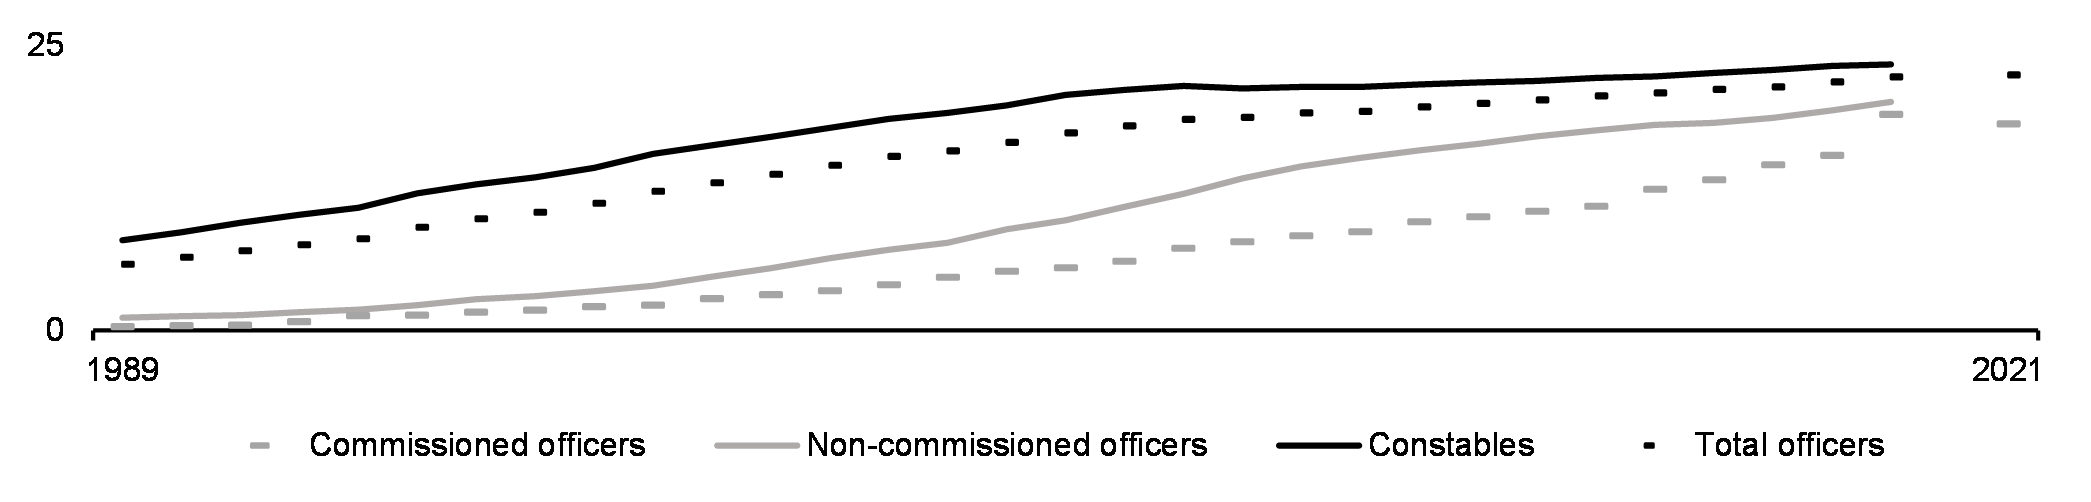 Female proportion of police officers, by rank (%, 1989-2021)